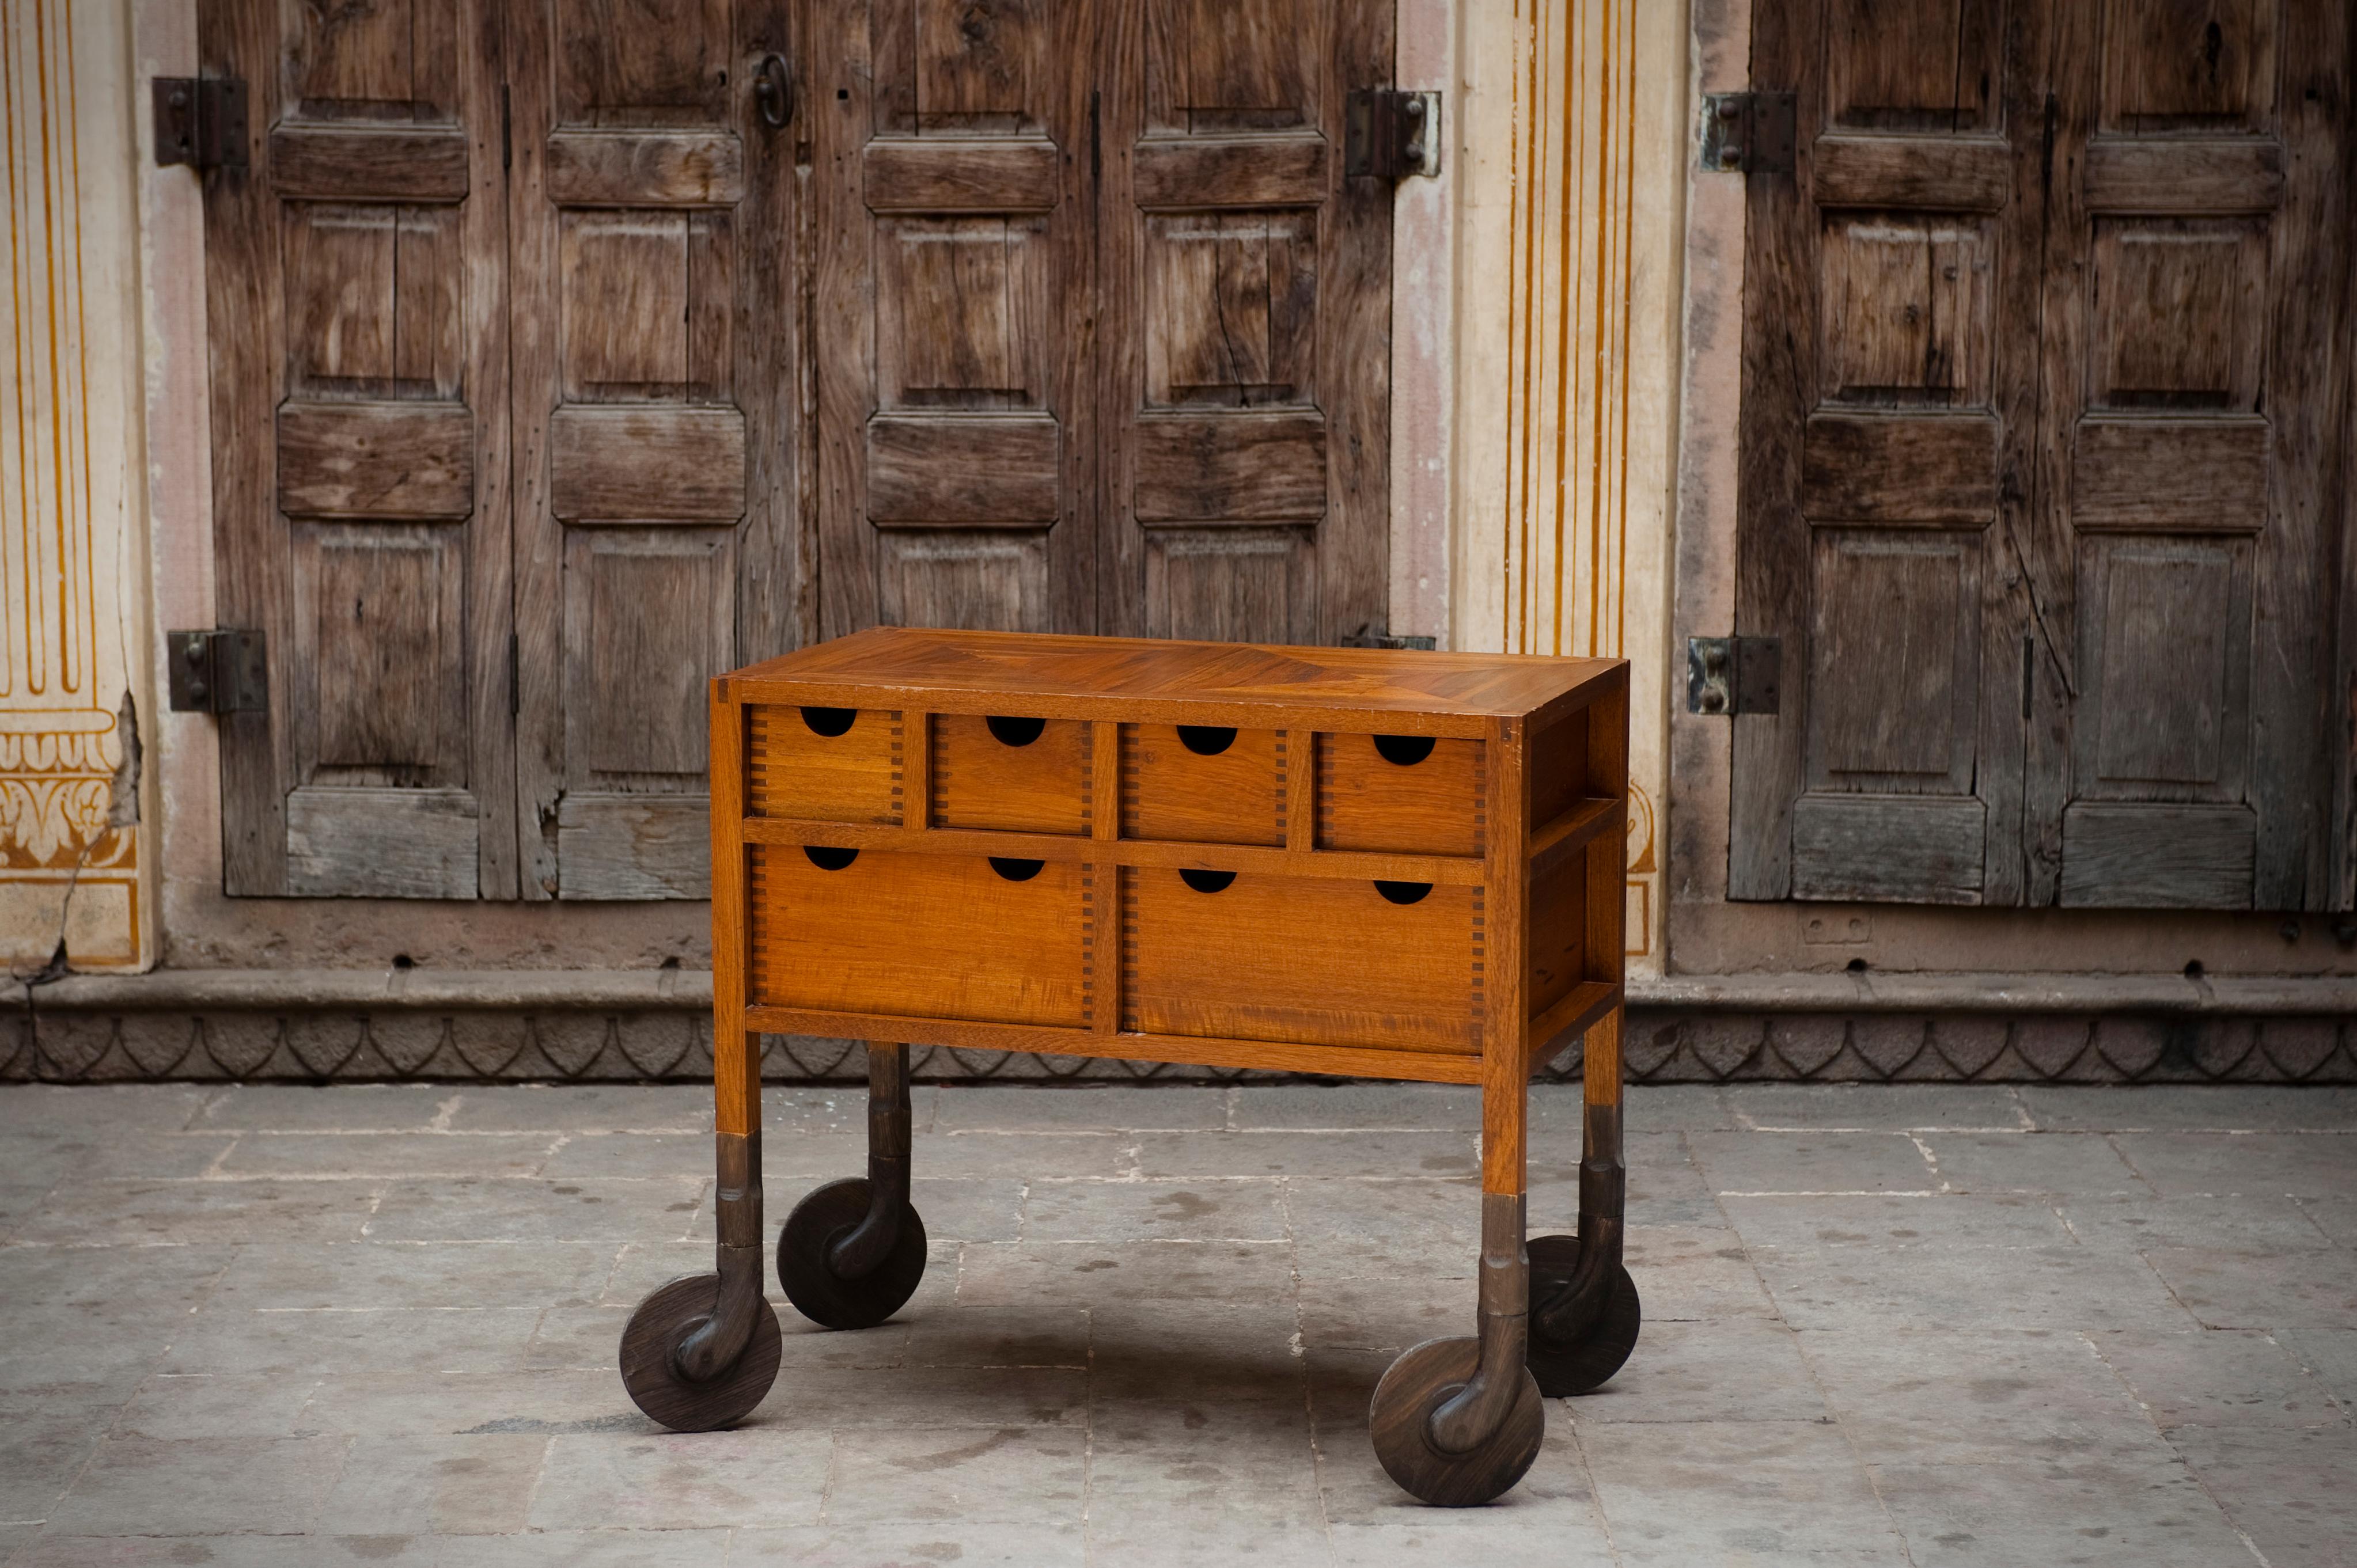 Built entirely of solid wood, the Shaker-influenced Rolling Dresser features open-frame construction and hand-carved, swiveling solid wood casters. No nails, screws, staples, pins or any metal part of fastener is used. Even the axle that the wooden